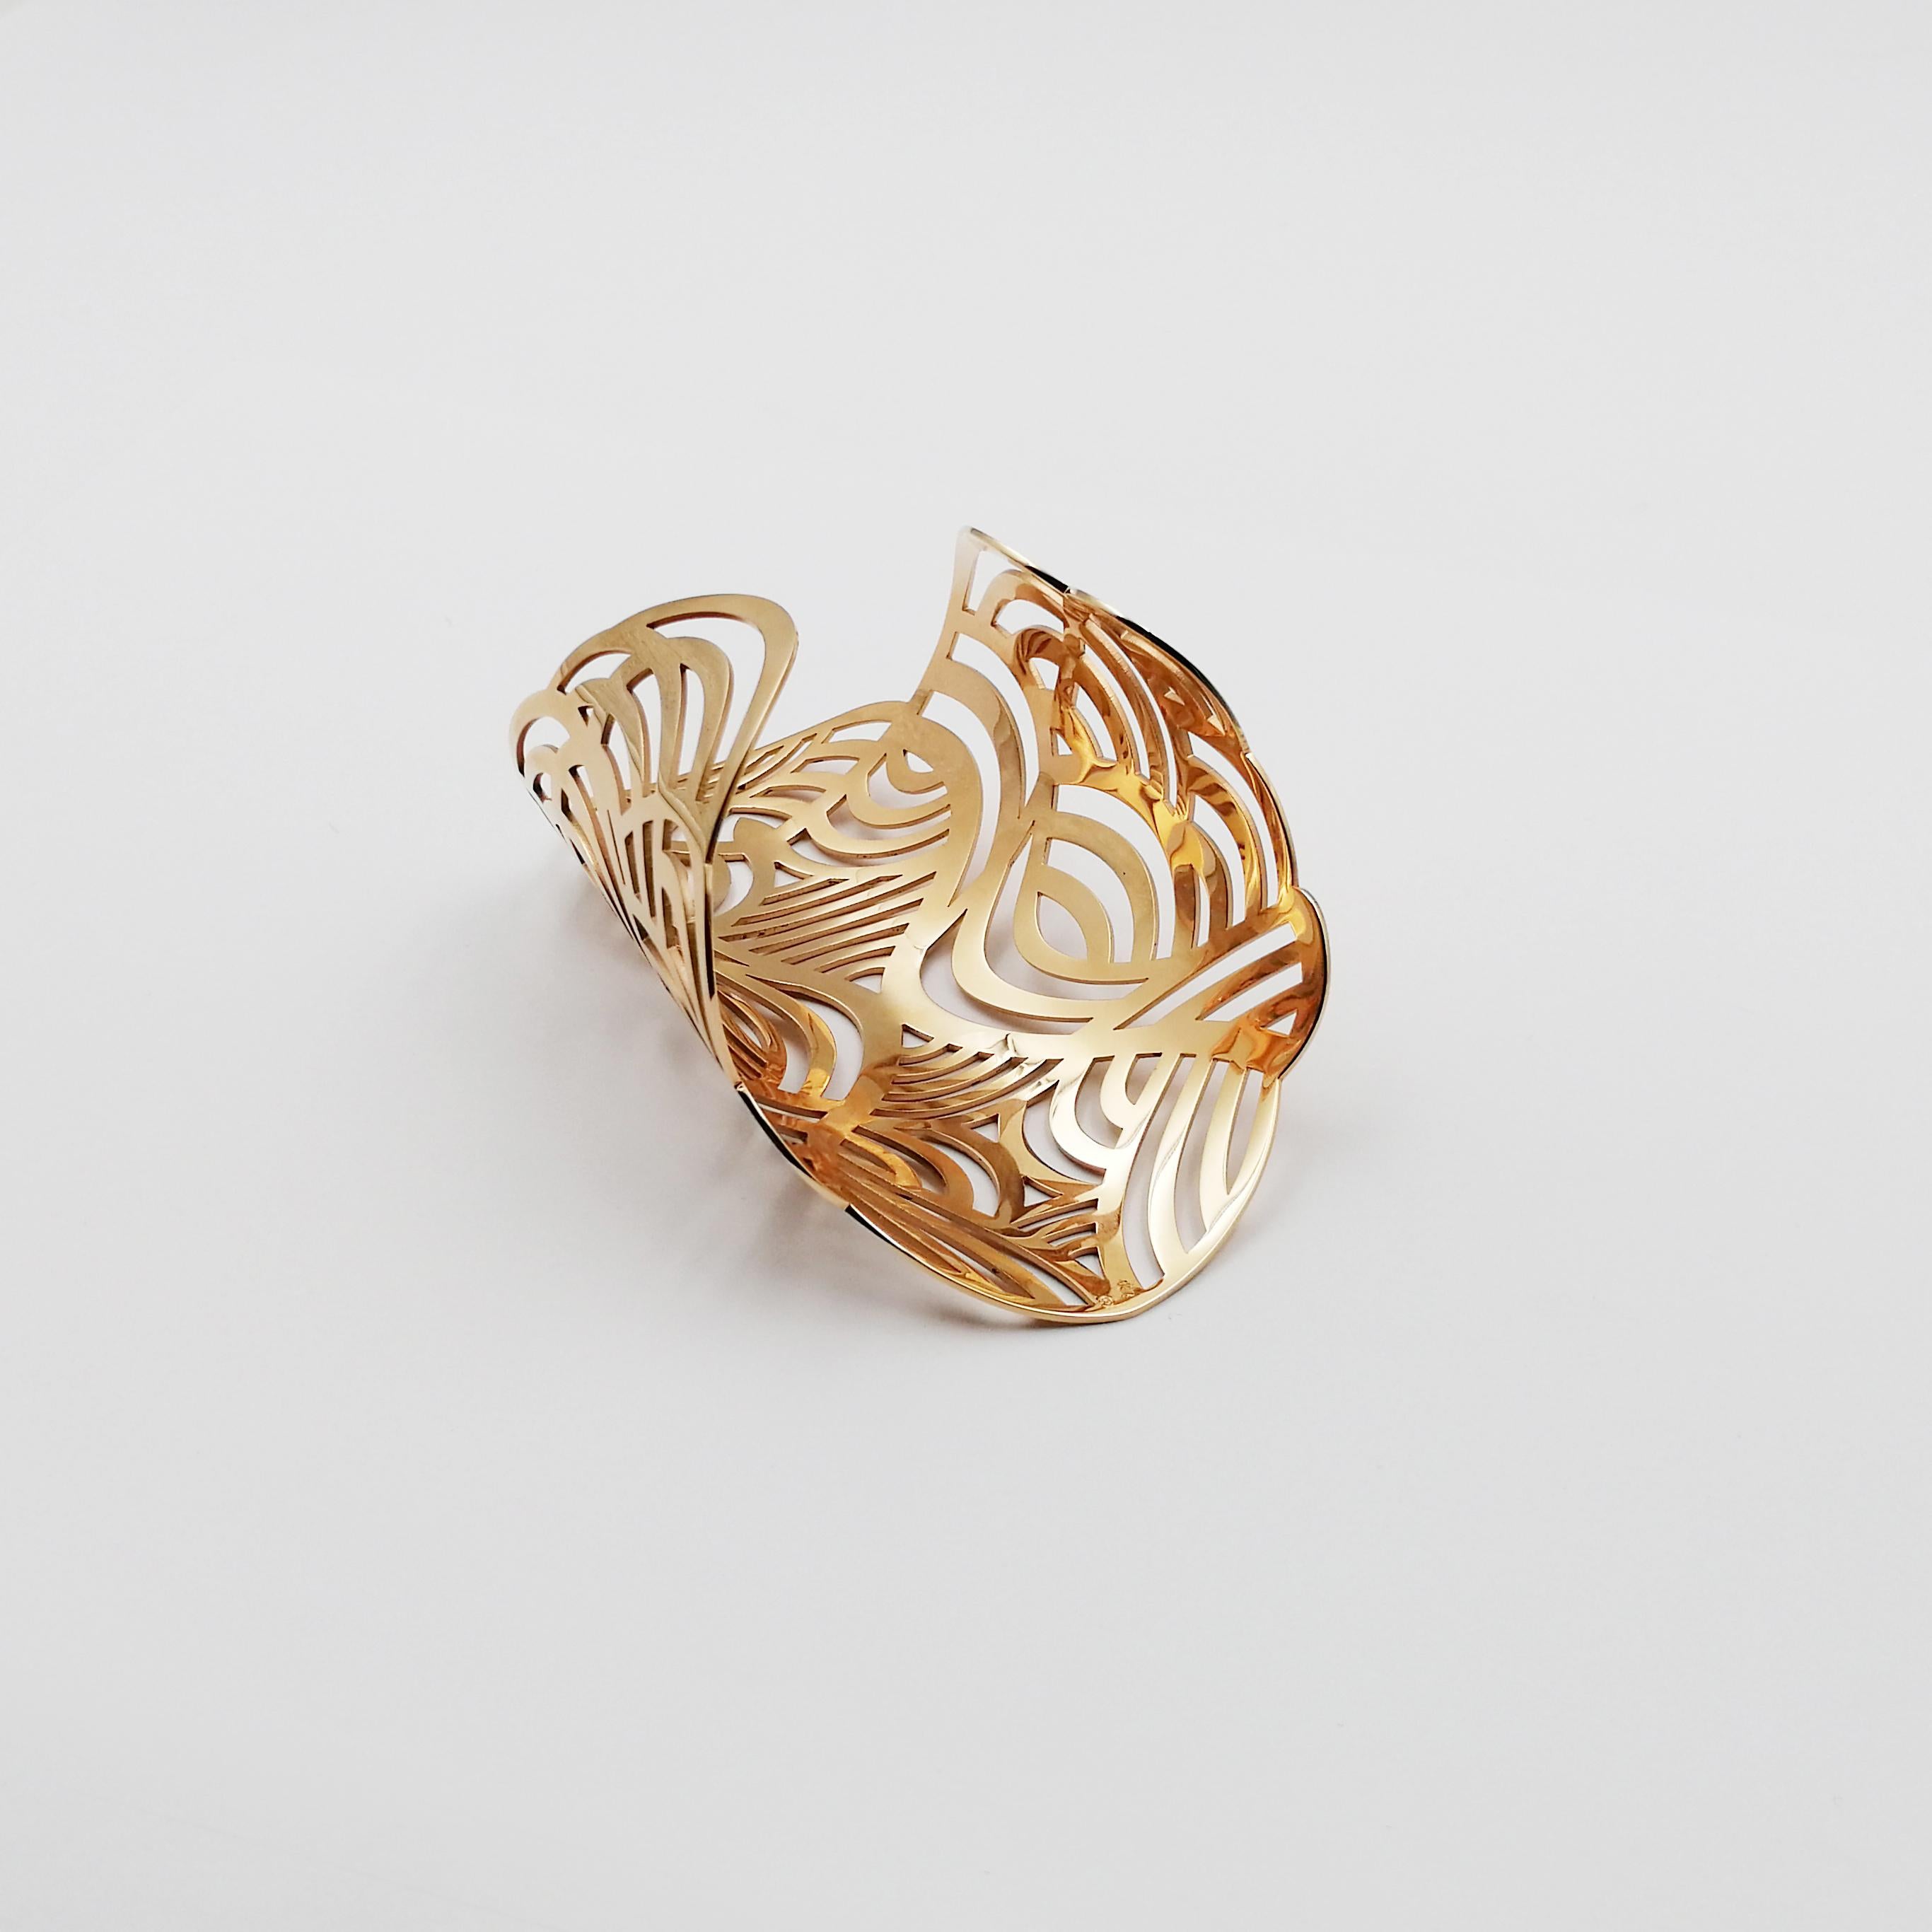 Widespread yet delicate, the fine lines of 18 karat pink gold forming this remarkable arm cuff wrap around the wrist with ease. In hypnotizing symmetry, the golden trails wind in bows and arches, giving the structure a tribal appeal. The bent shape